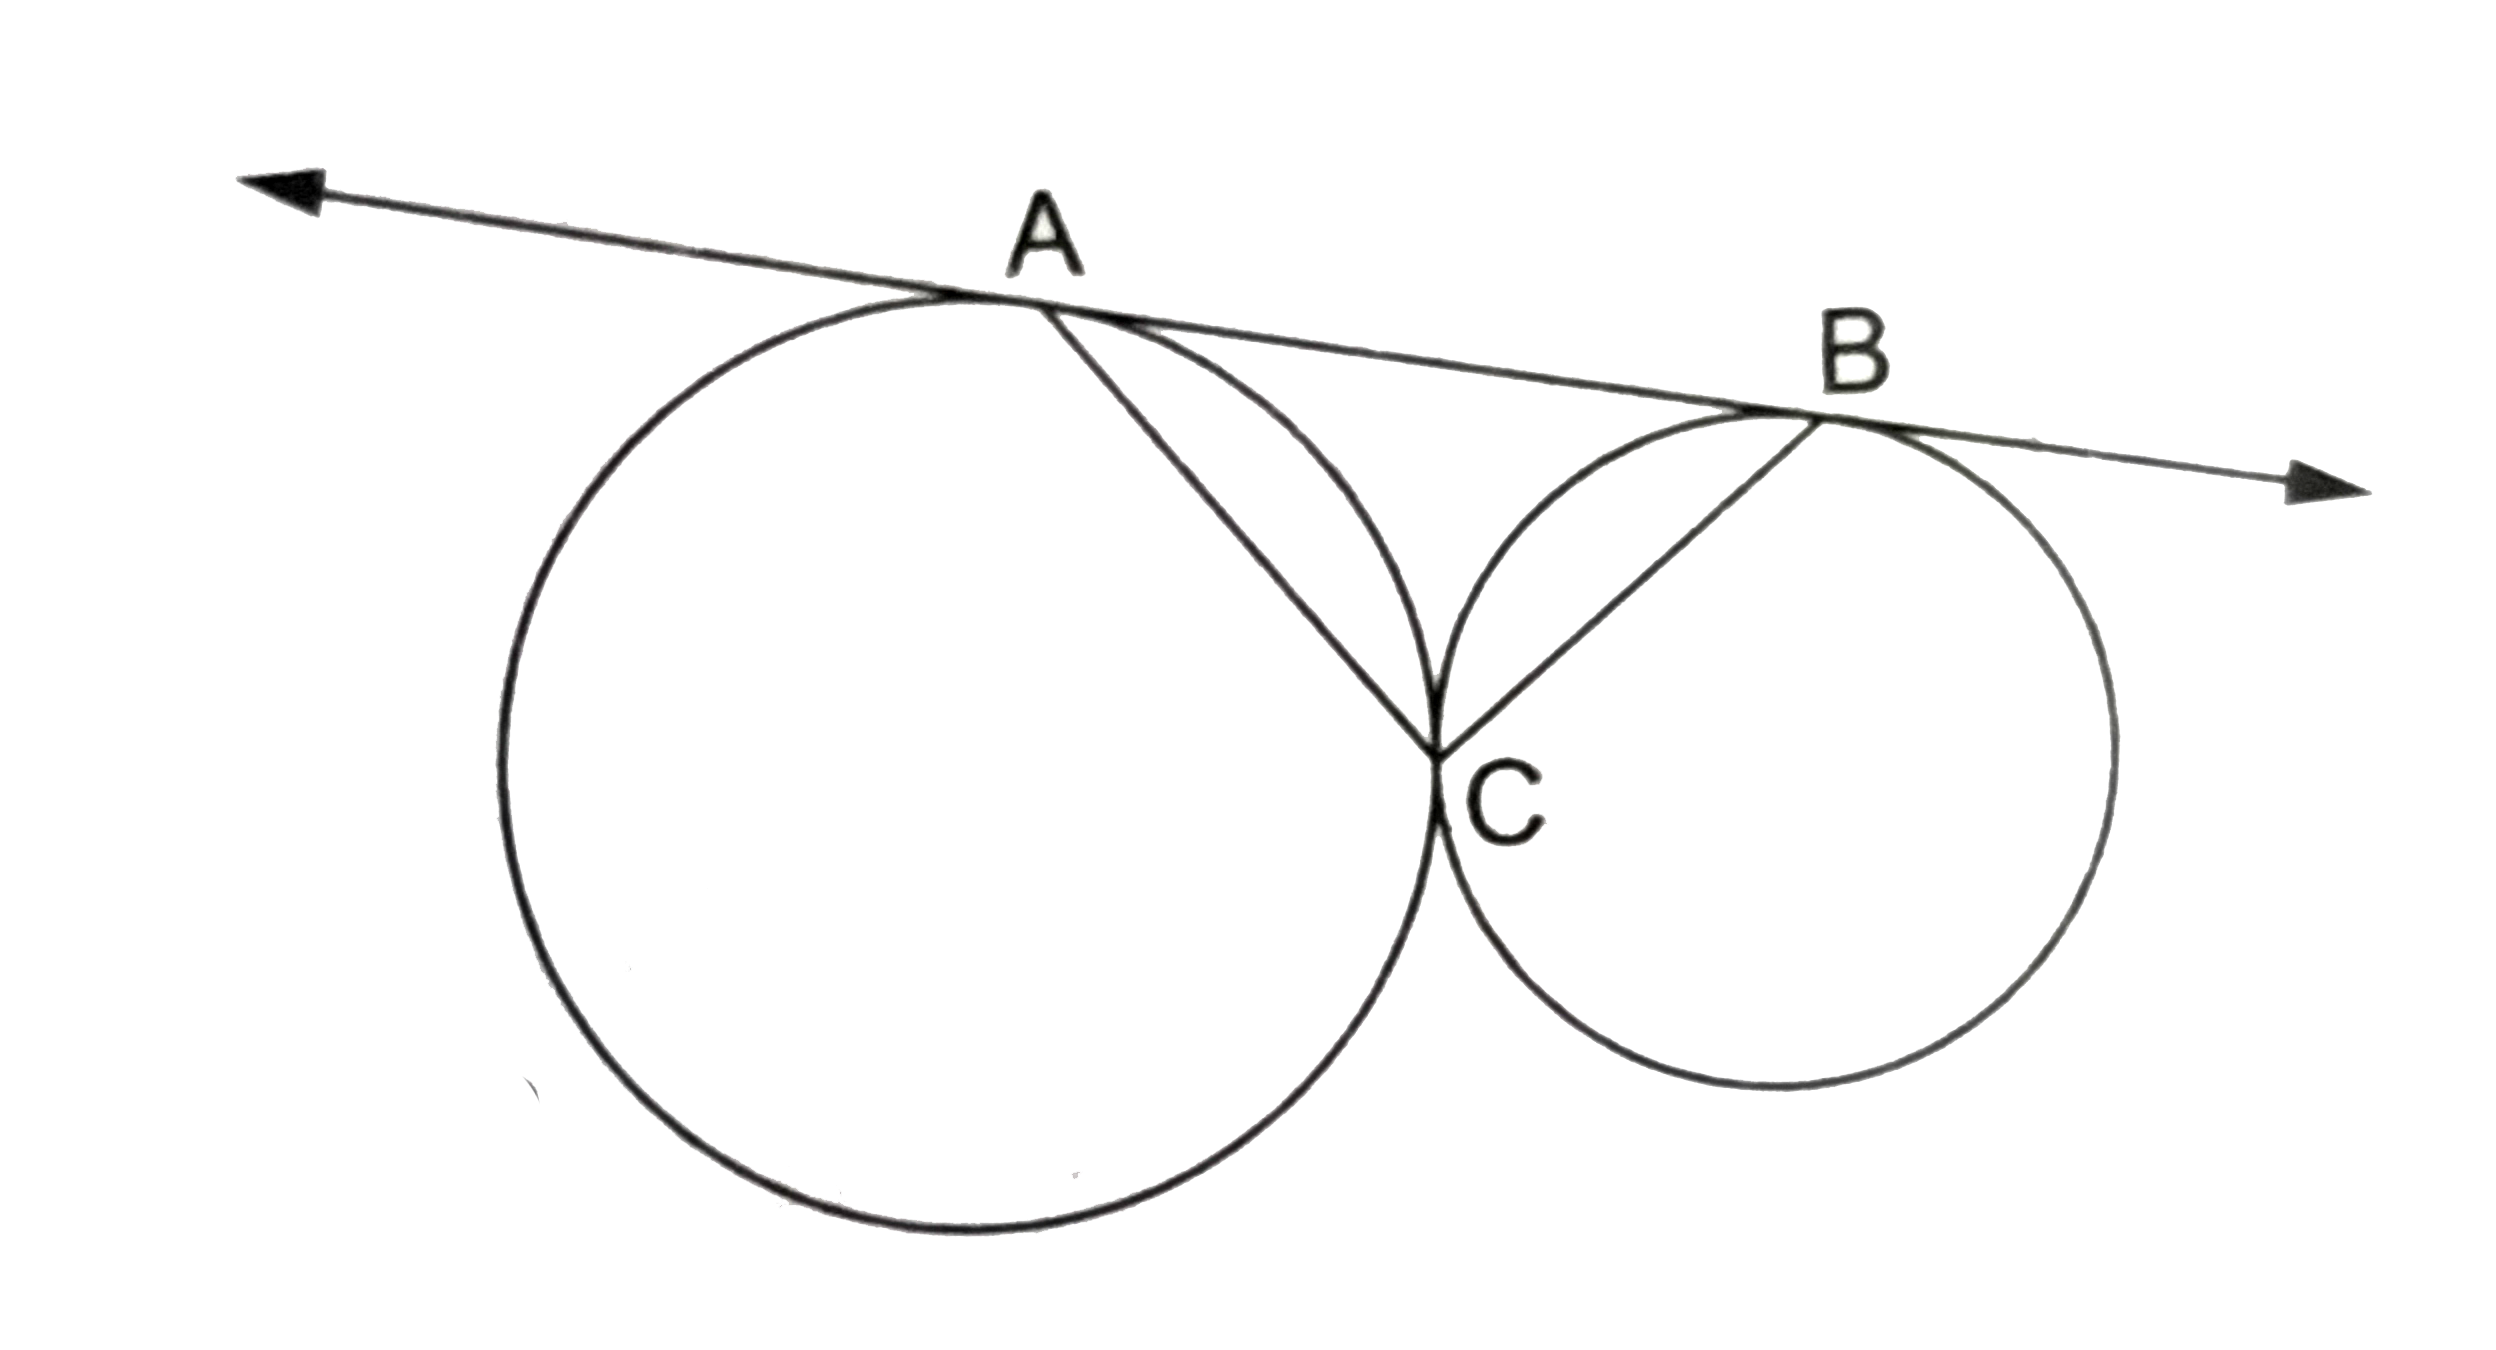 In the given figure, two circles touch each other at C and AB is a tangent to both the circles. The mesure of /ACB is